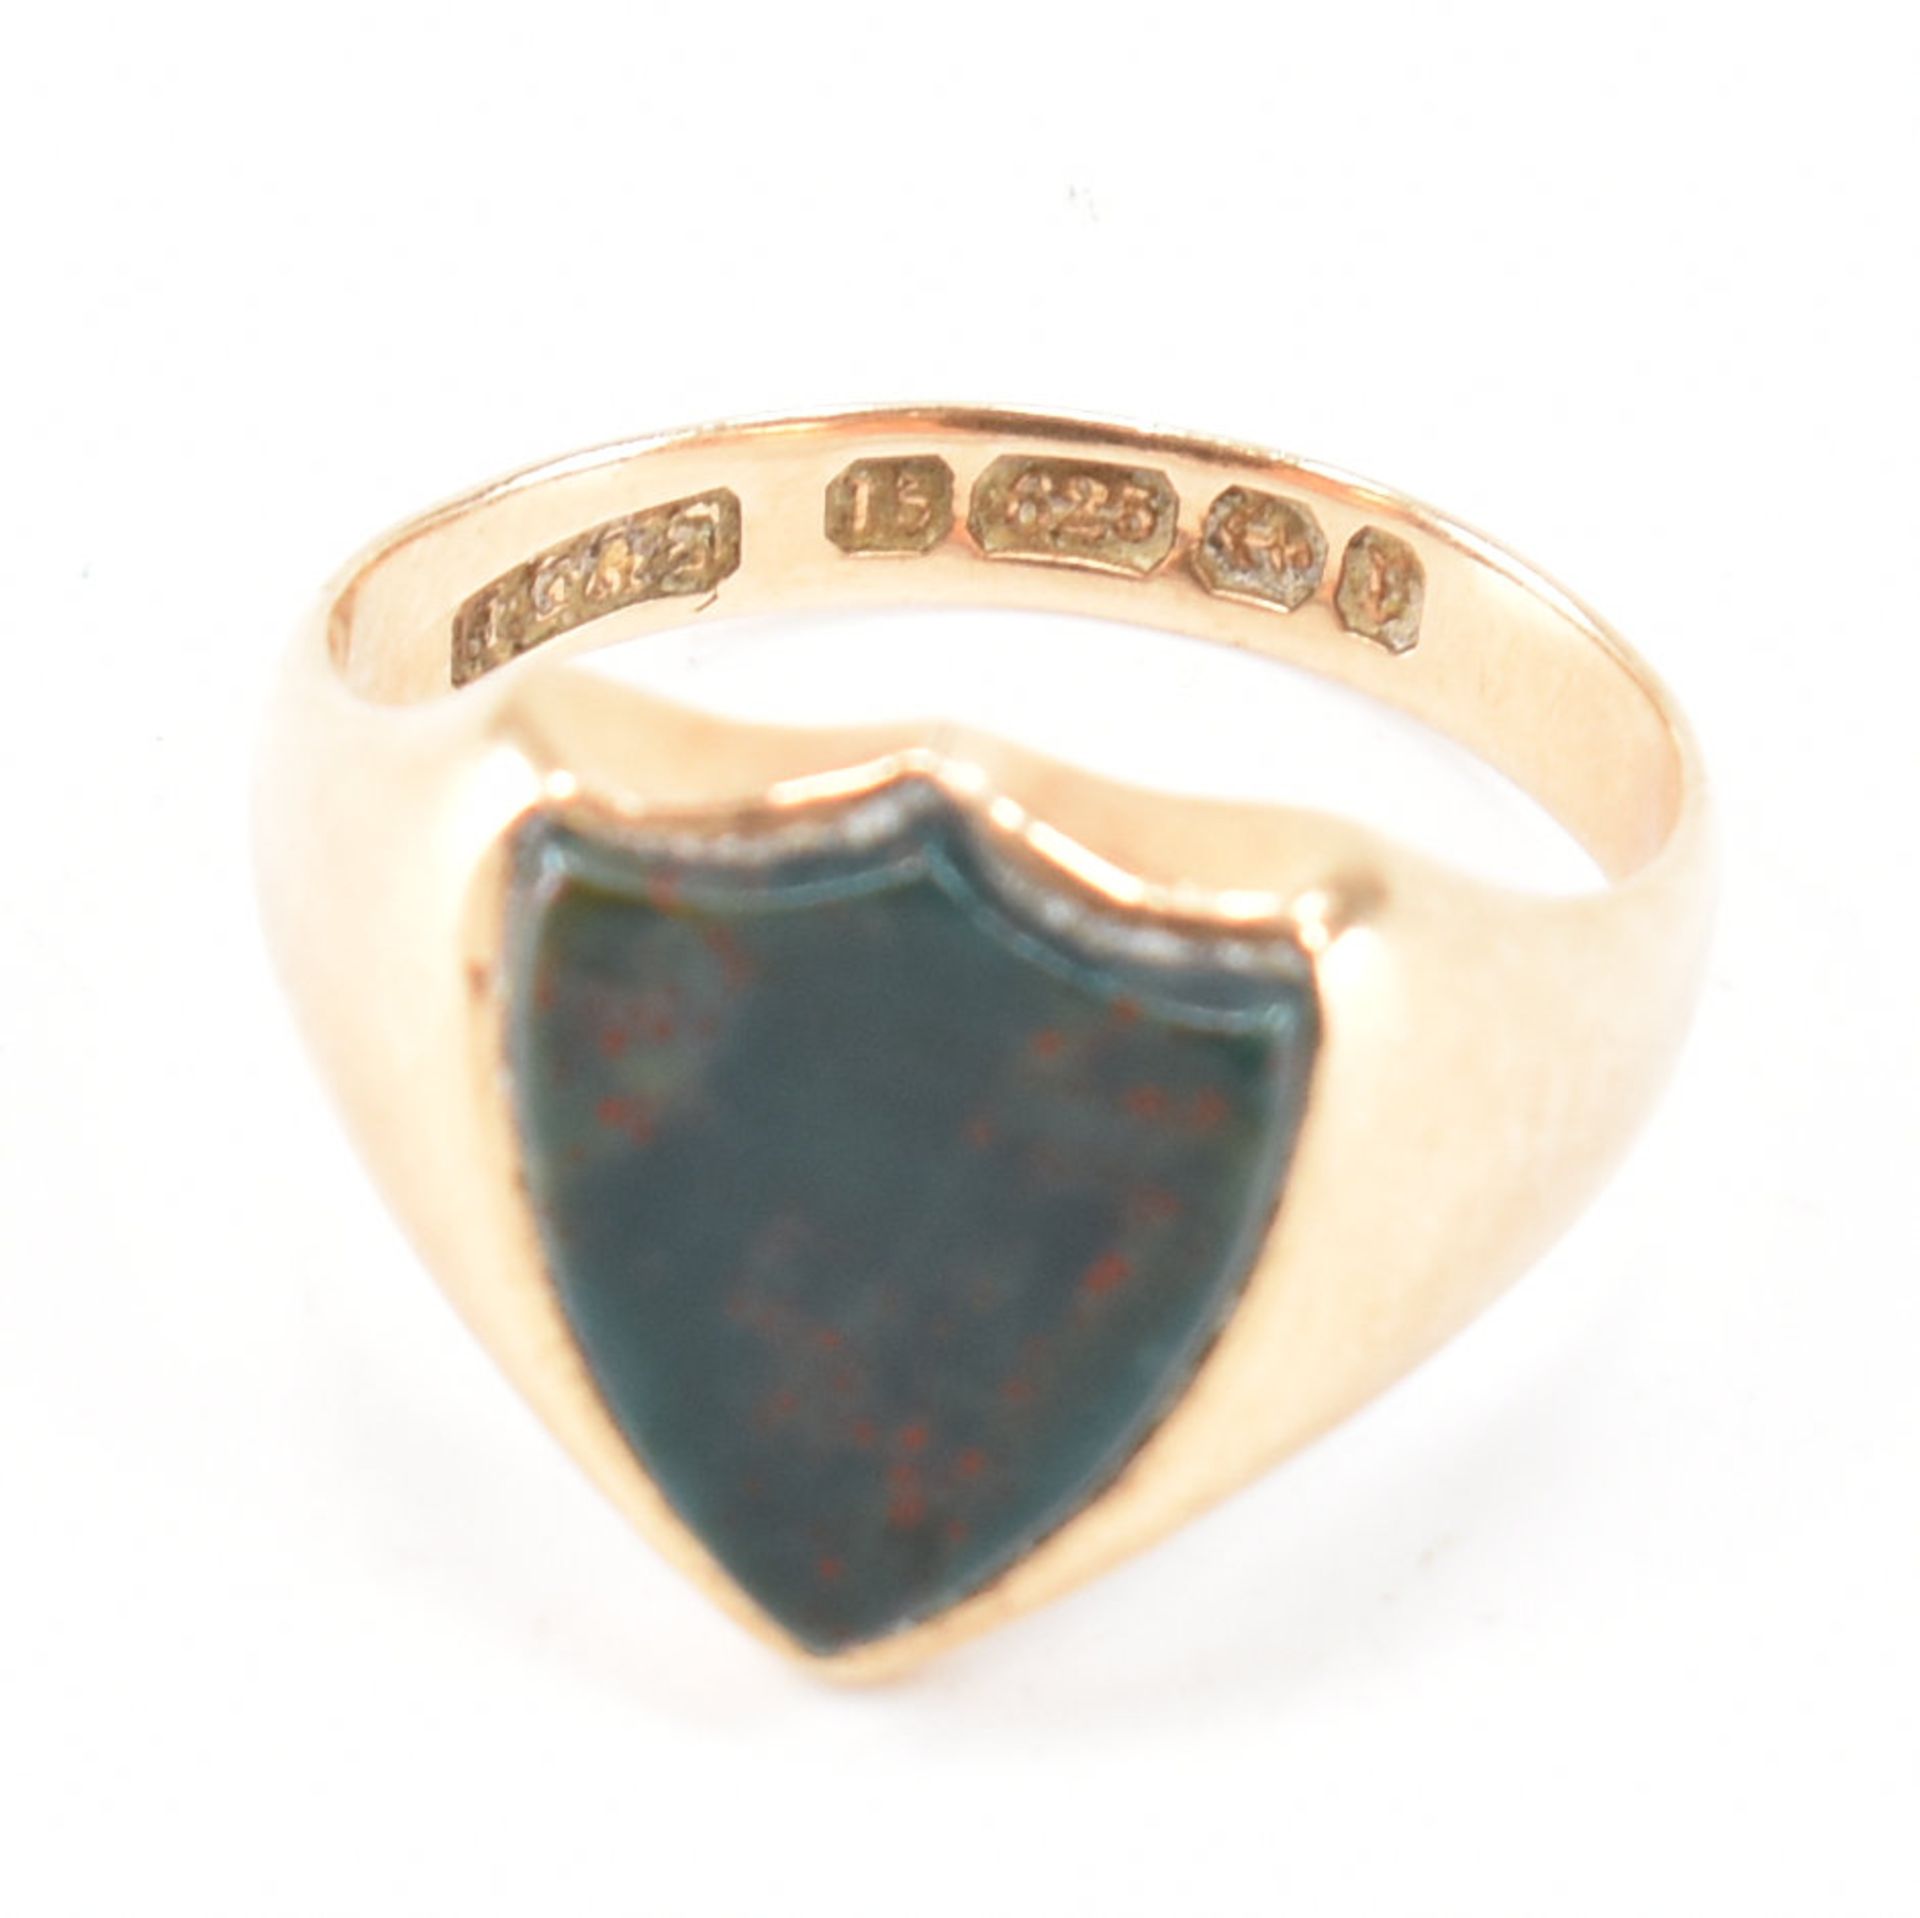 VICTORIAN 15CT GOLD & BLOODSTONE SIGNET RING - Image 7 of 9